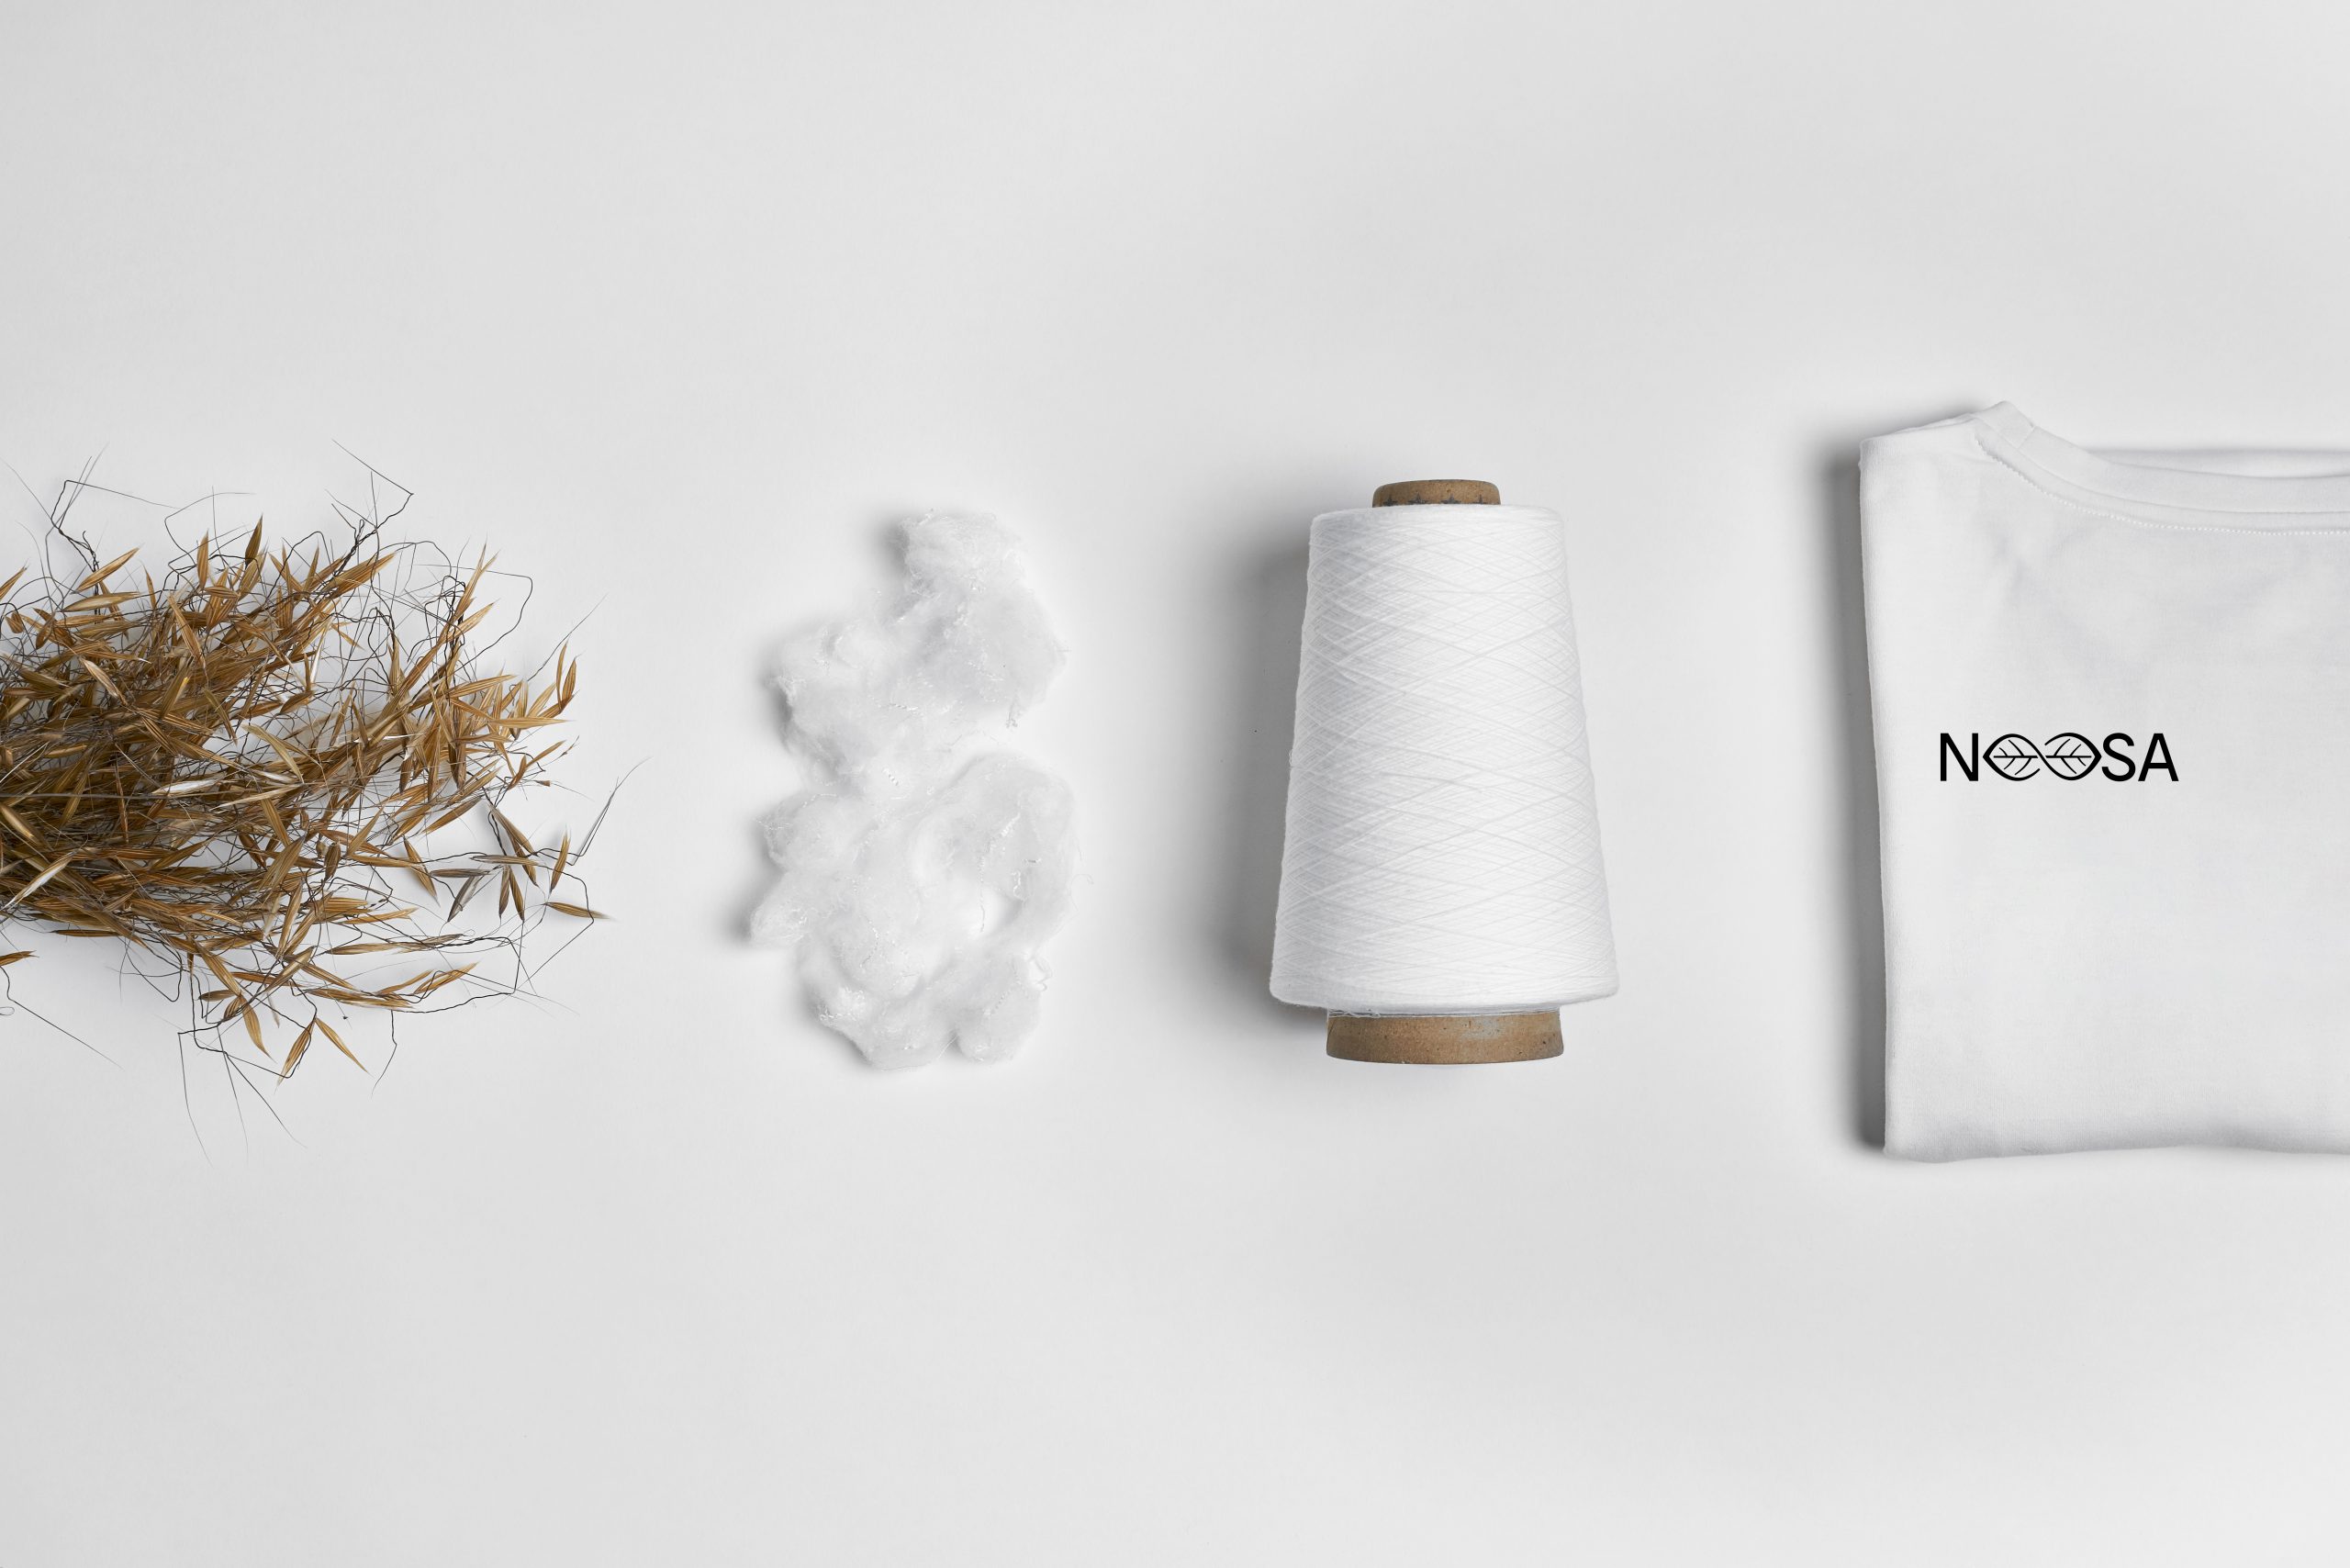 NOOSA™ 's process from the bio-renewable resource to the bio-based and recyclable textile fibers, yarns and end-product.